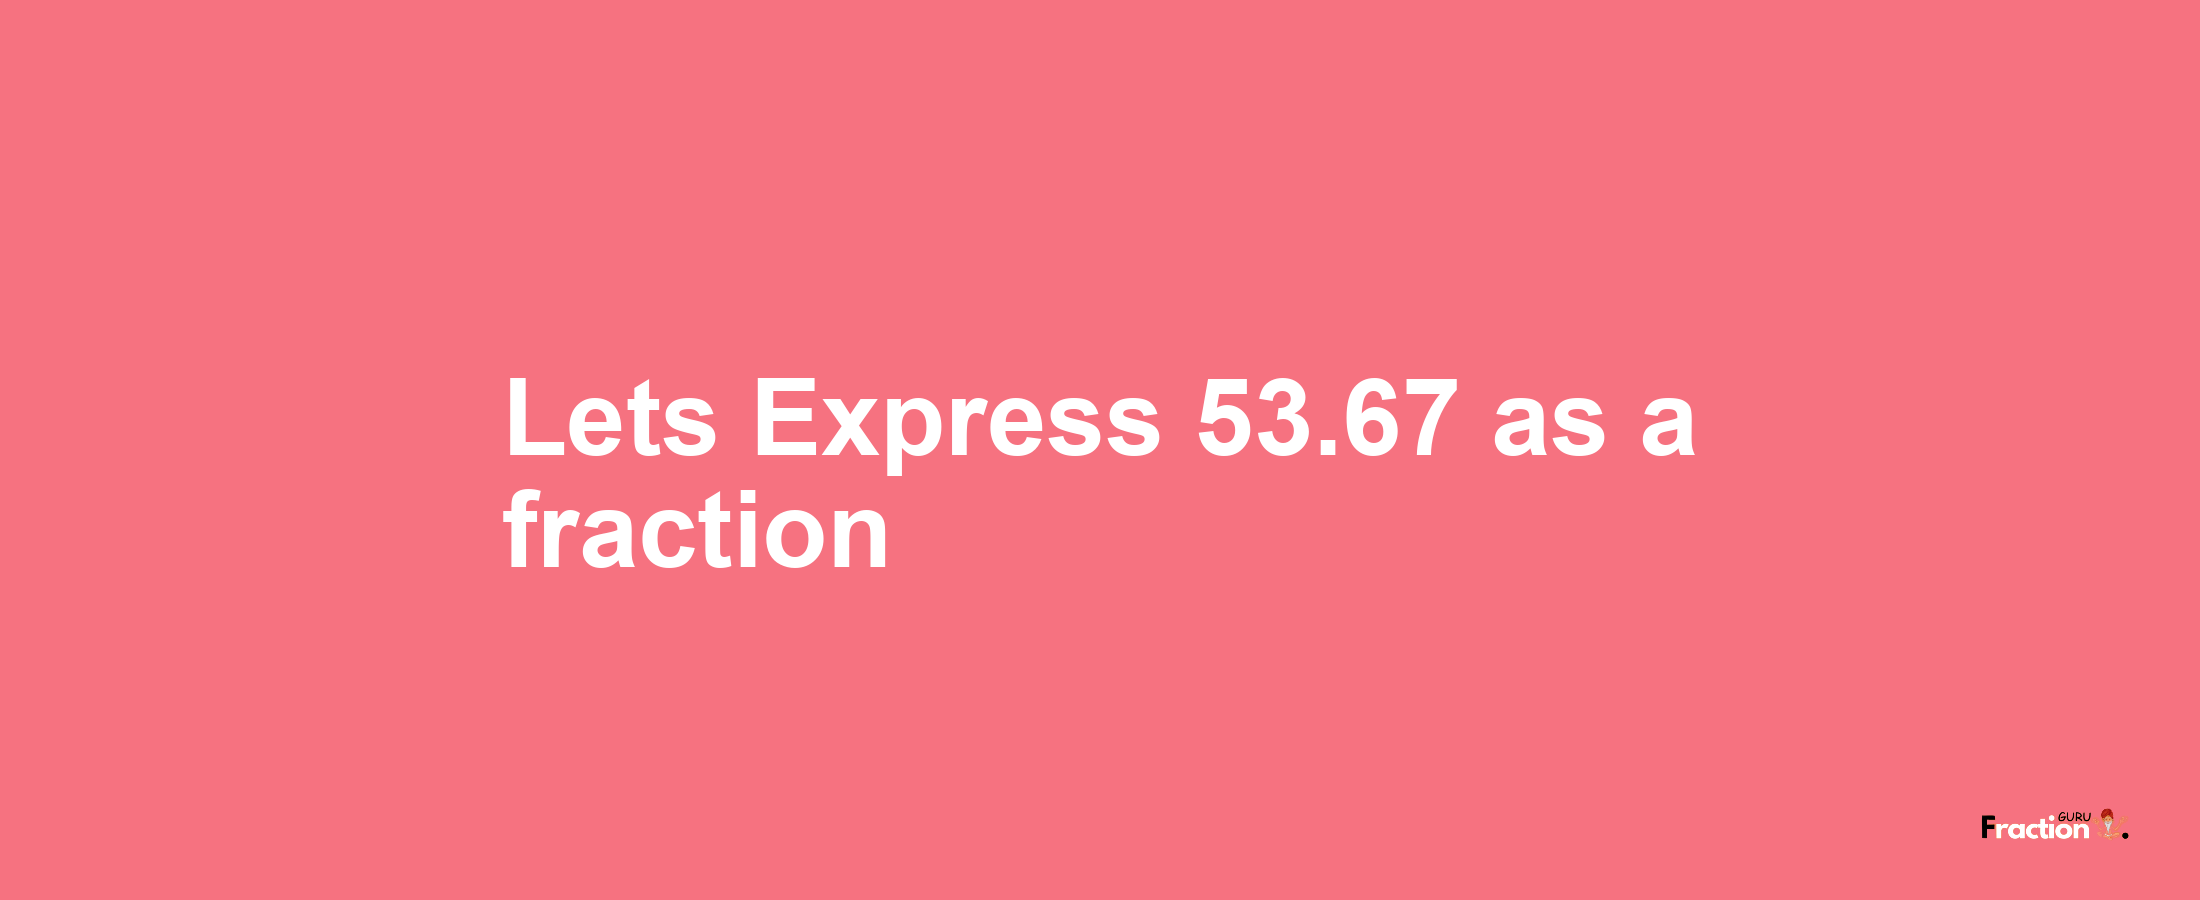 Lets Express 53.67 as afraction